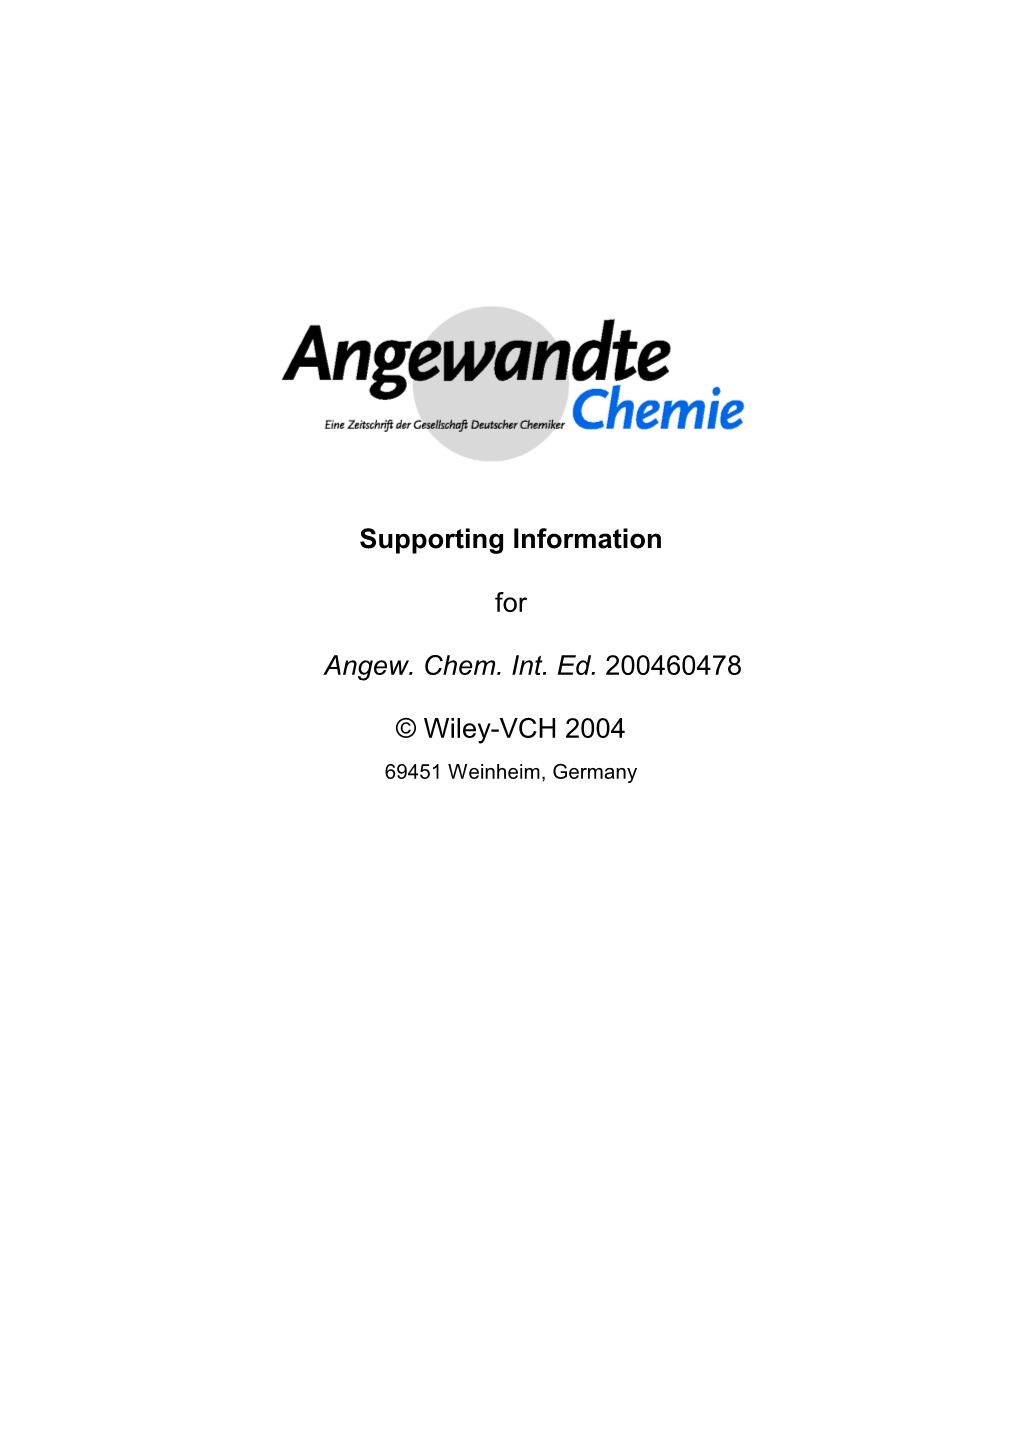 Supporting Information for Angew. Chem. Int. Ed. 200460478 © Wiley-VCH 2004